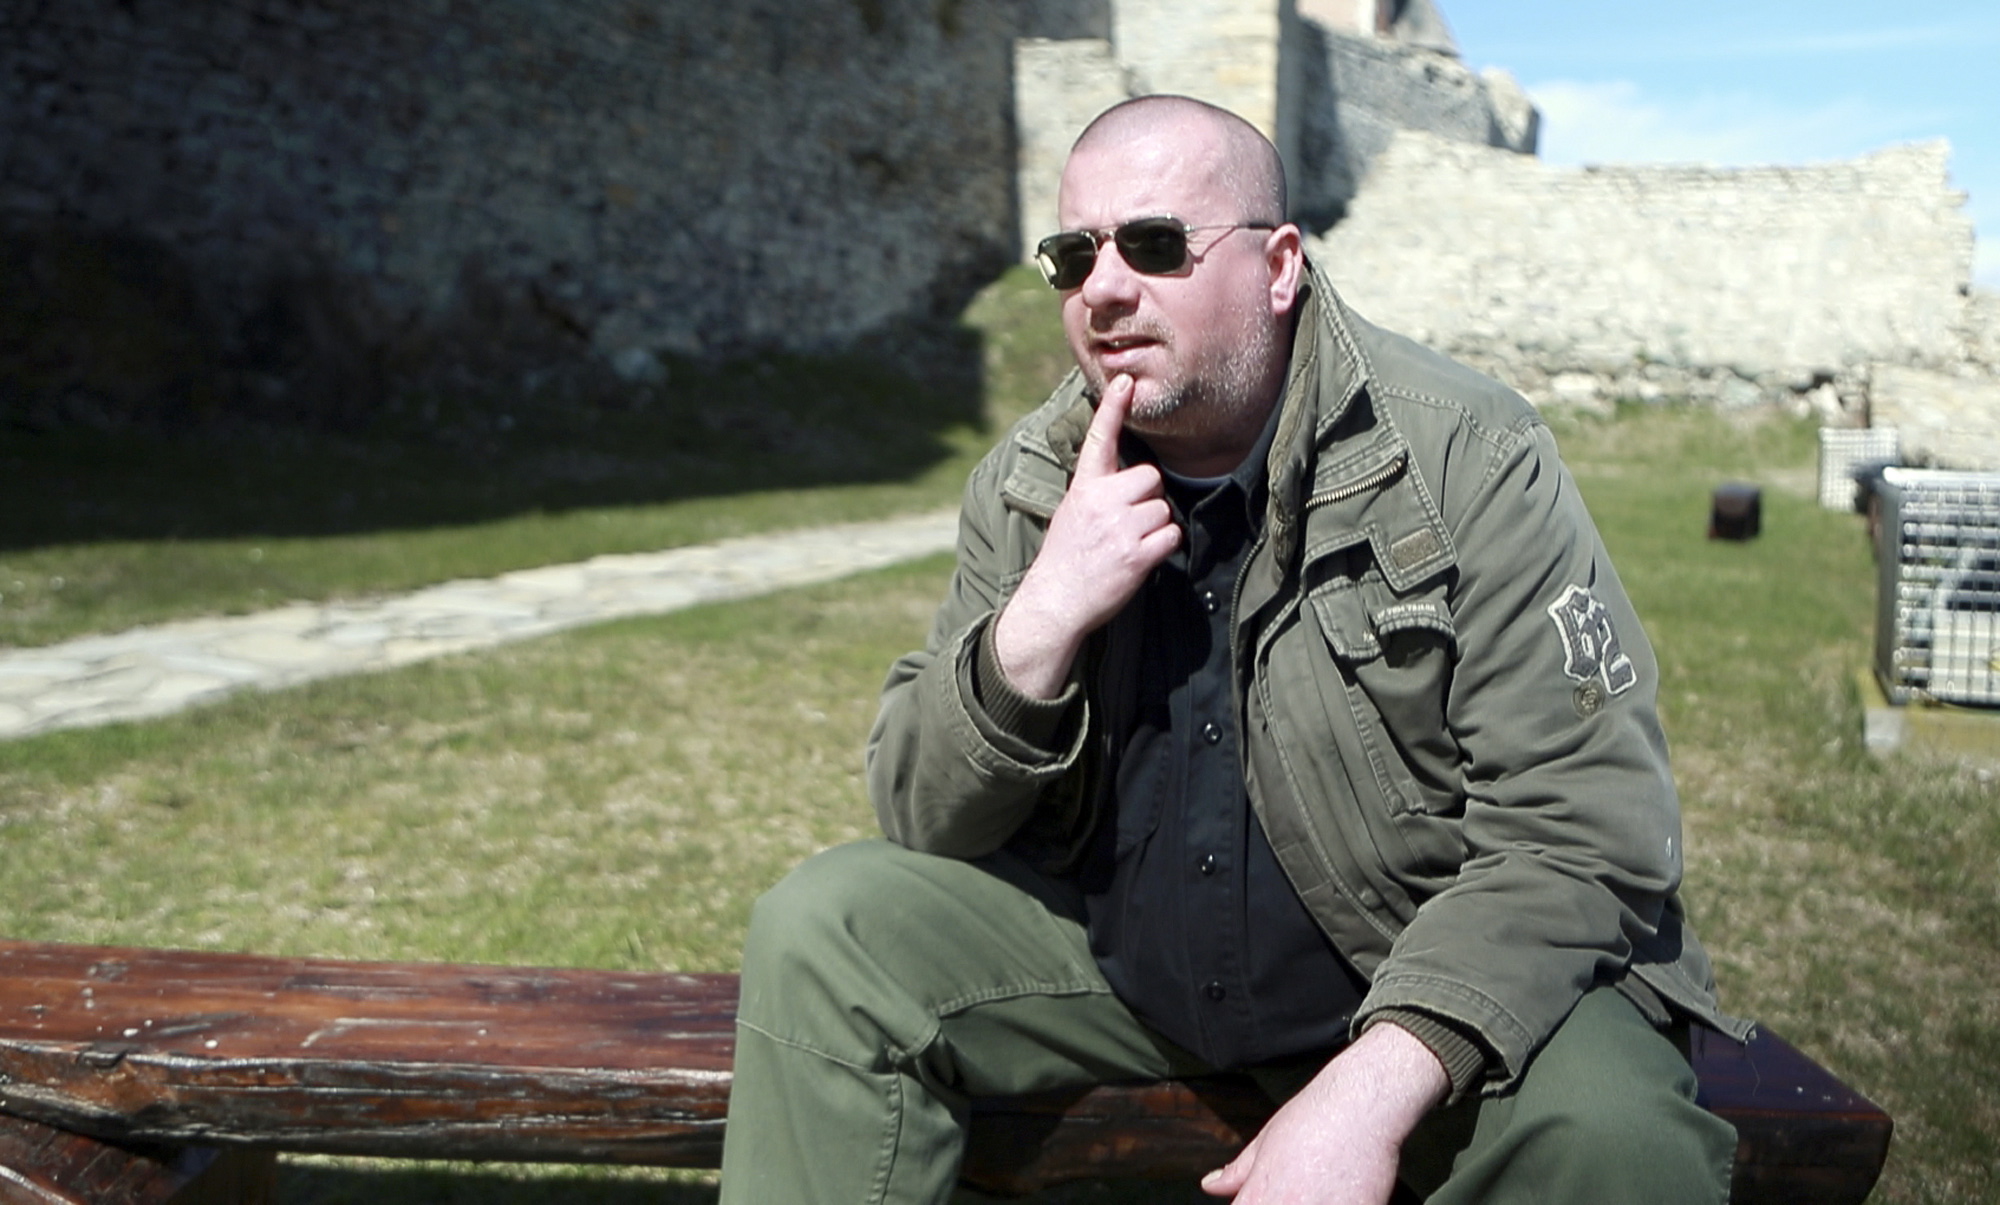 War veteran Tomislav Galovic gestures during an interview with the Associated Press in Zagreb, Croatia, on April 10.